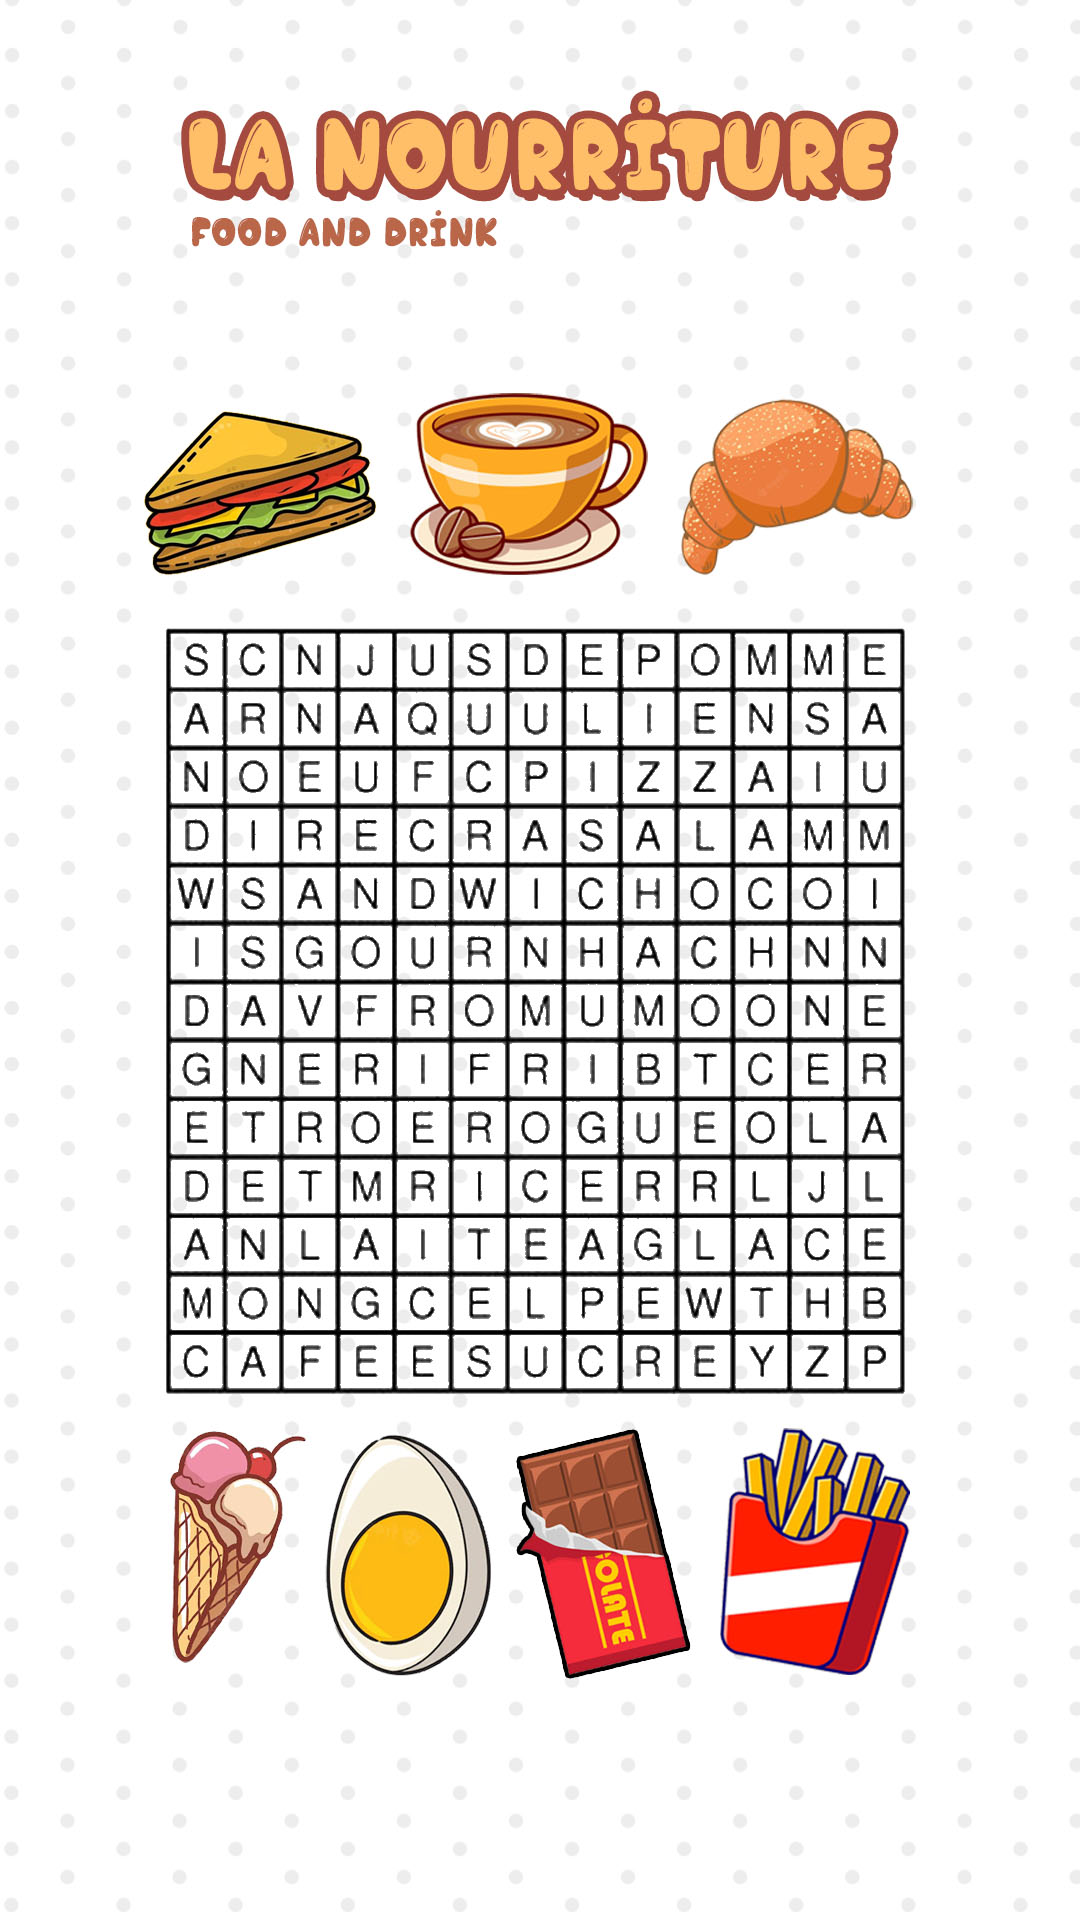 French Food Worksheets Image